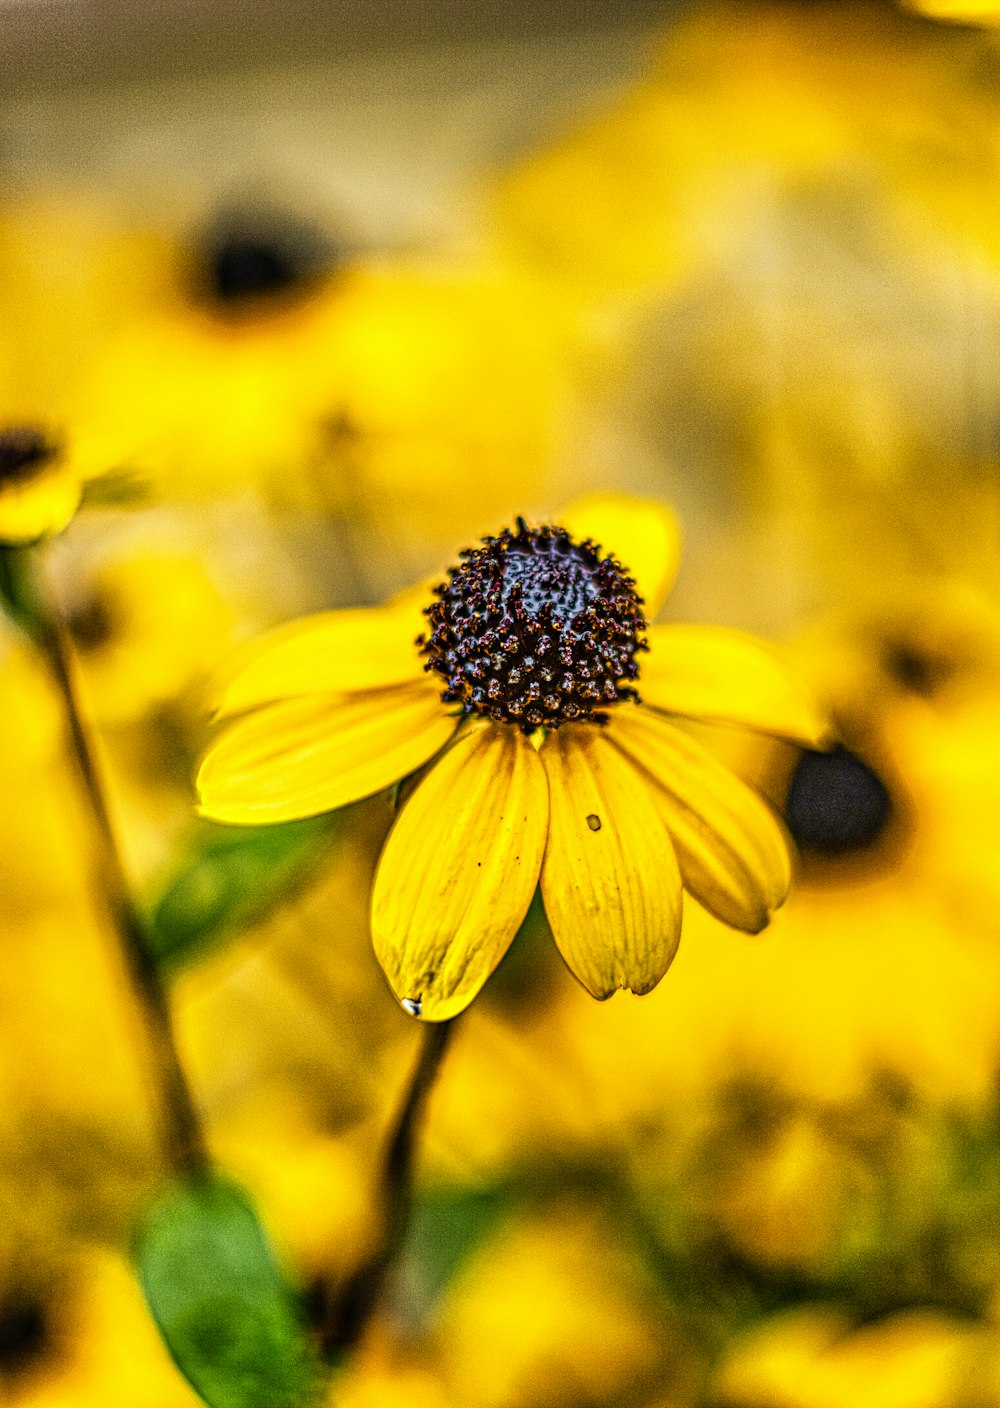 a close up of a yellow flower in a field of yellow flowers